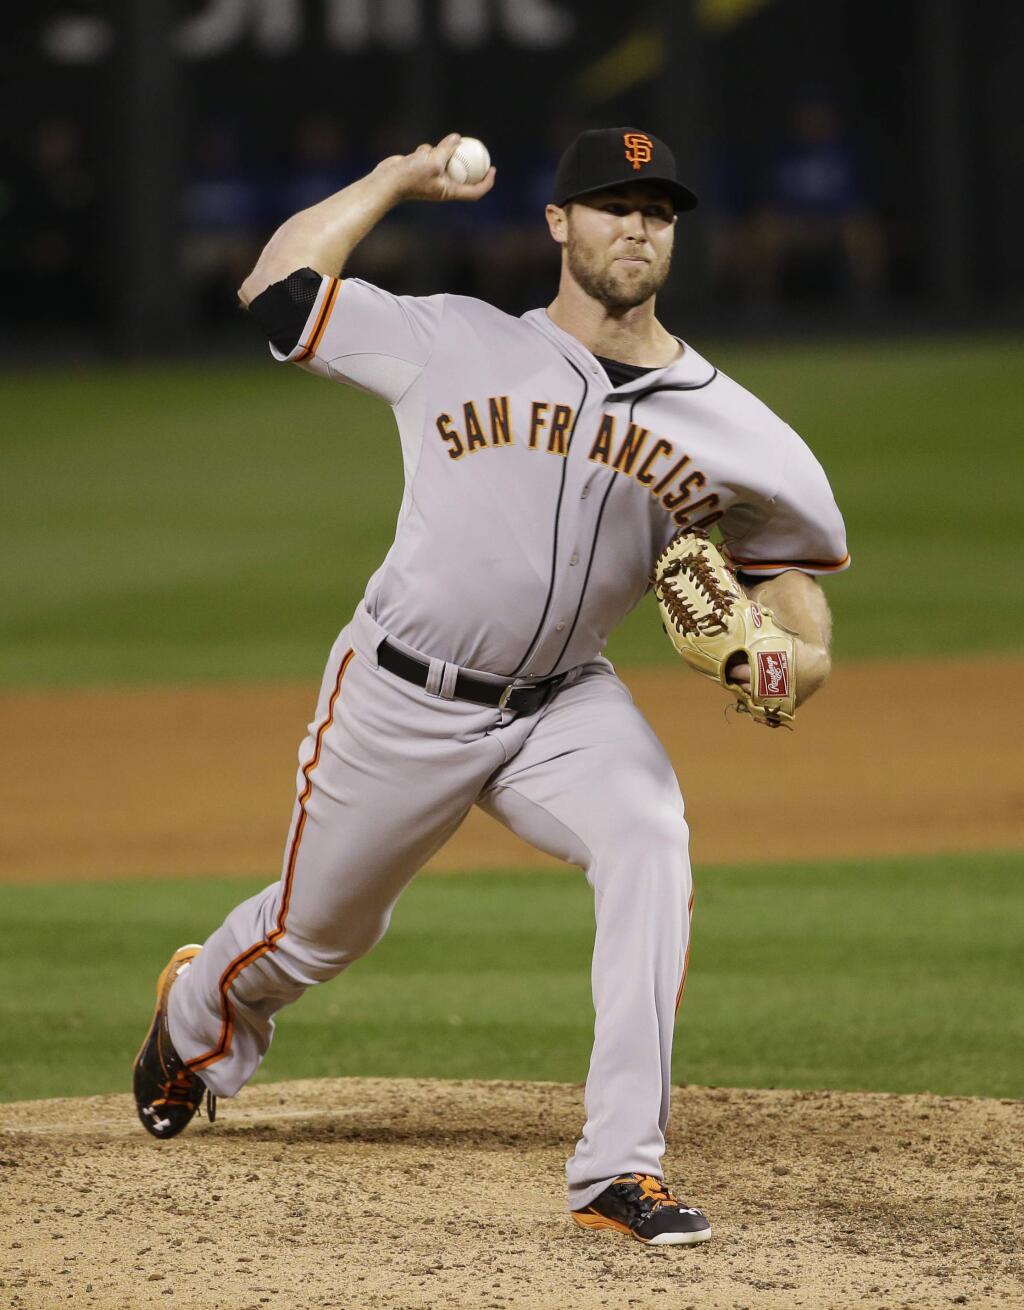 San Francisco Giants pitcher Hunter Strickland pitches during the ninth inning of Game 1 of the World Series against the Kansas City Royals Tuesday, Oct. 21, 2014, in Kansas City, Mo. The Giants defeated the Royals 7-1 to take the first game of the best-of-seven series. (AP Photo/Matt Slocum)